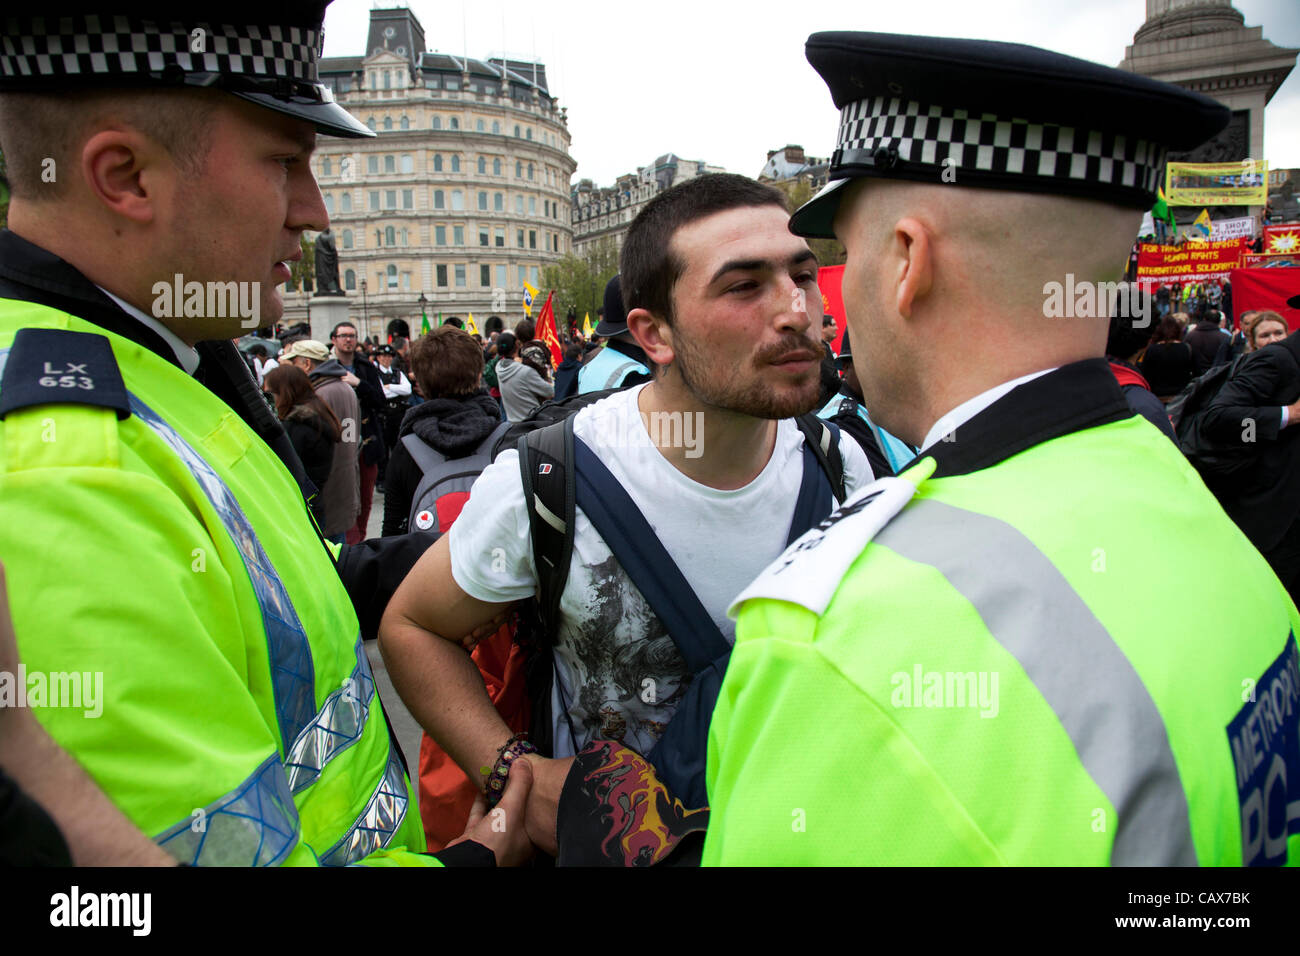 London, UK. 1 May, 2012. Police get into discussion with a protester they de-masked. Demonstration by unions and other organisations of workers to mark the annual May Day or Labour Day. Groups from all nationalities from around the World, living in London gathered to march. Stock Photo